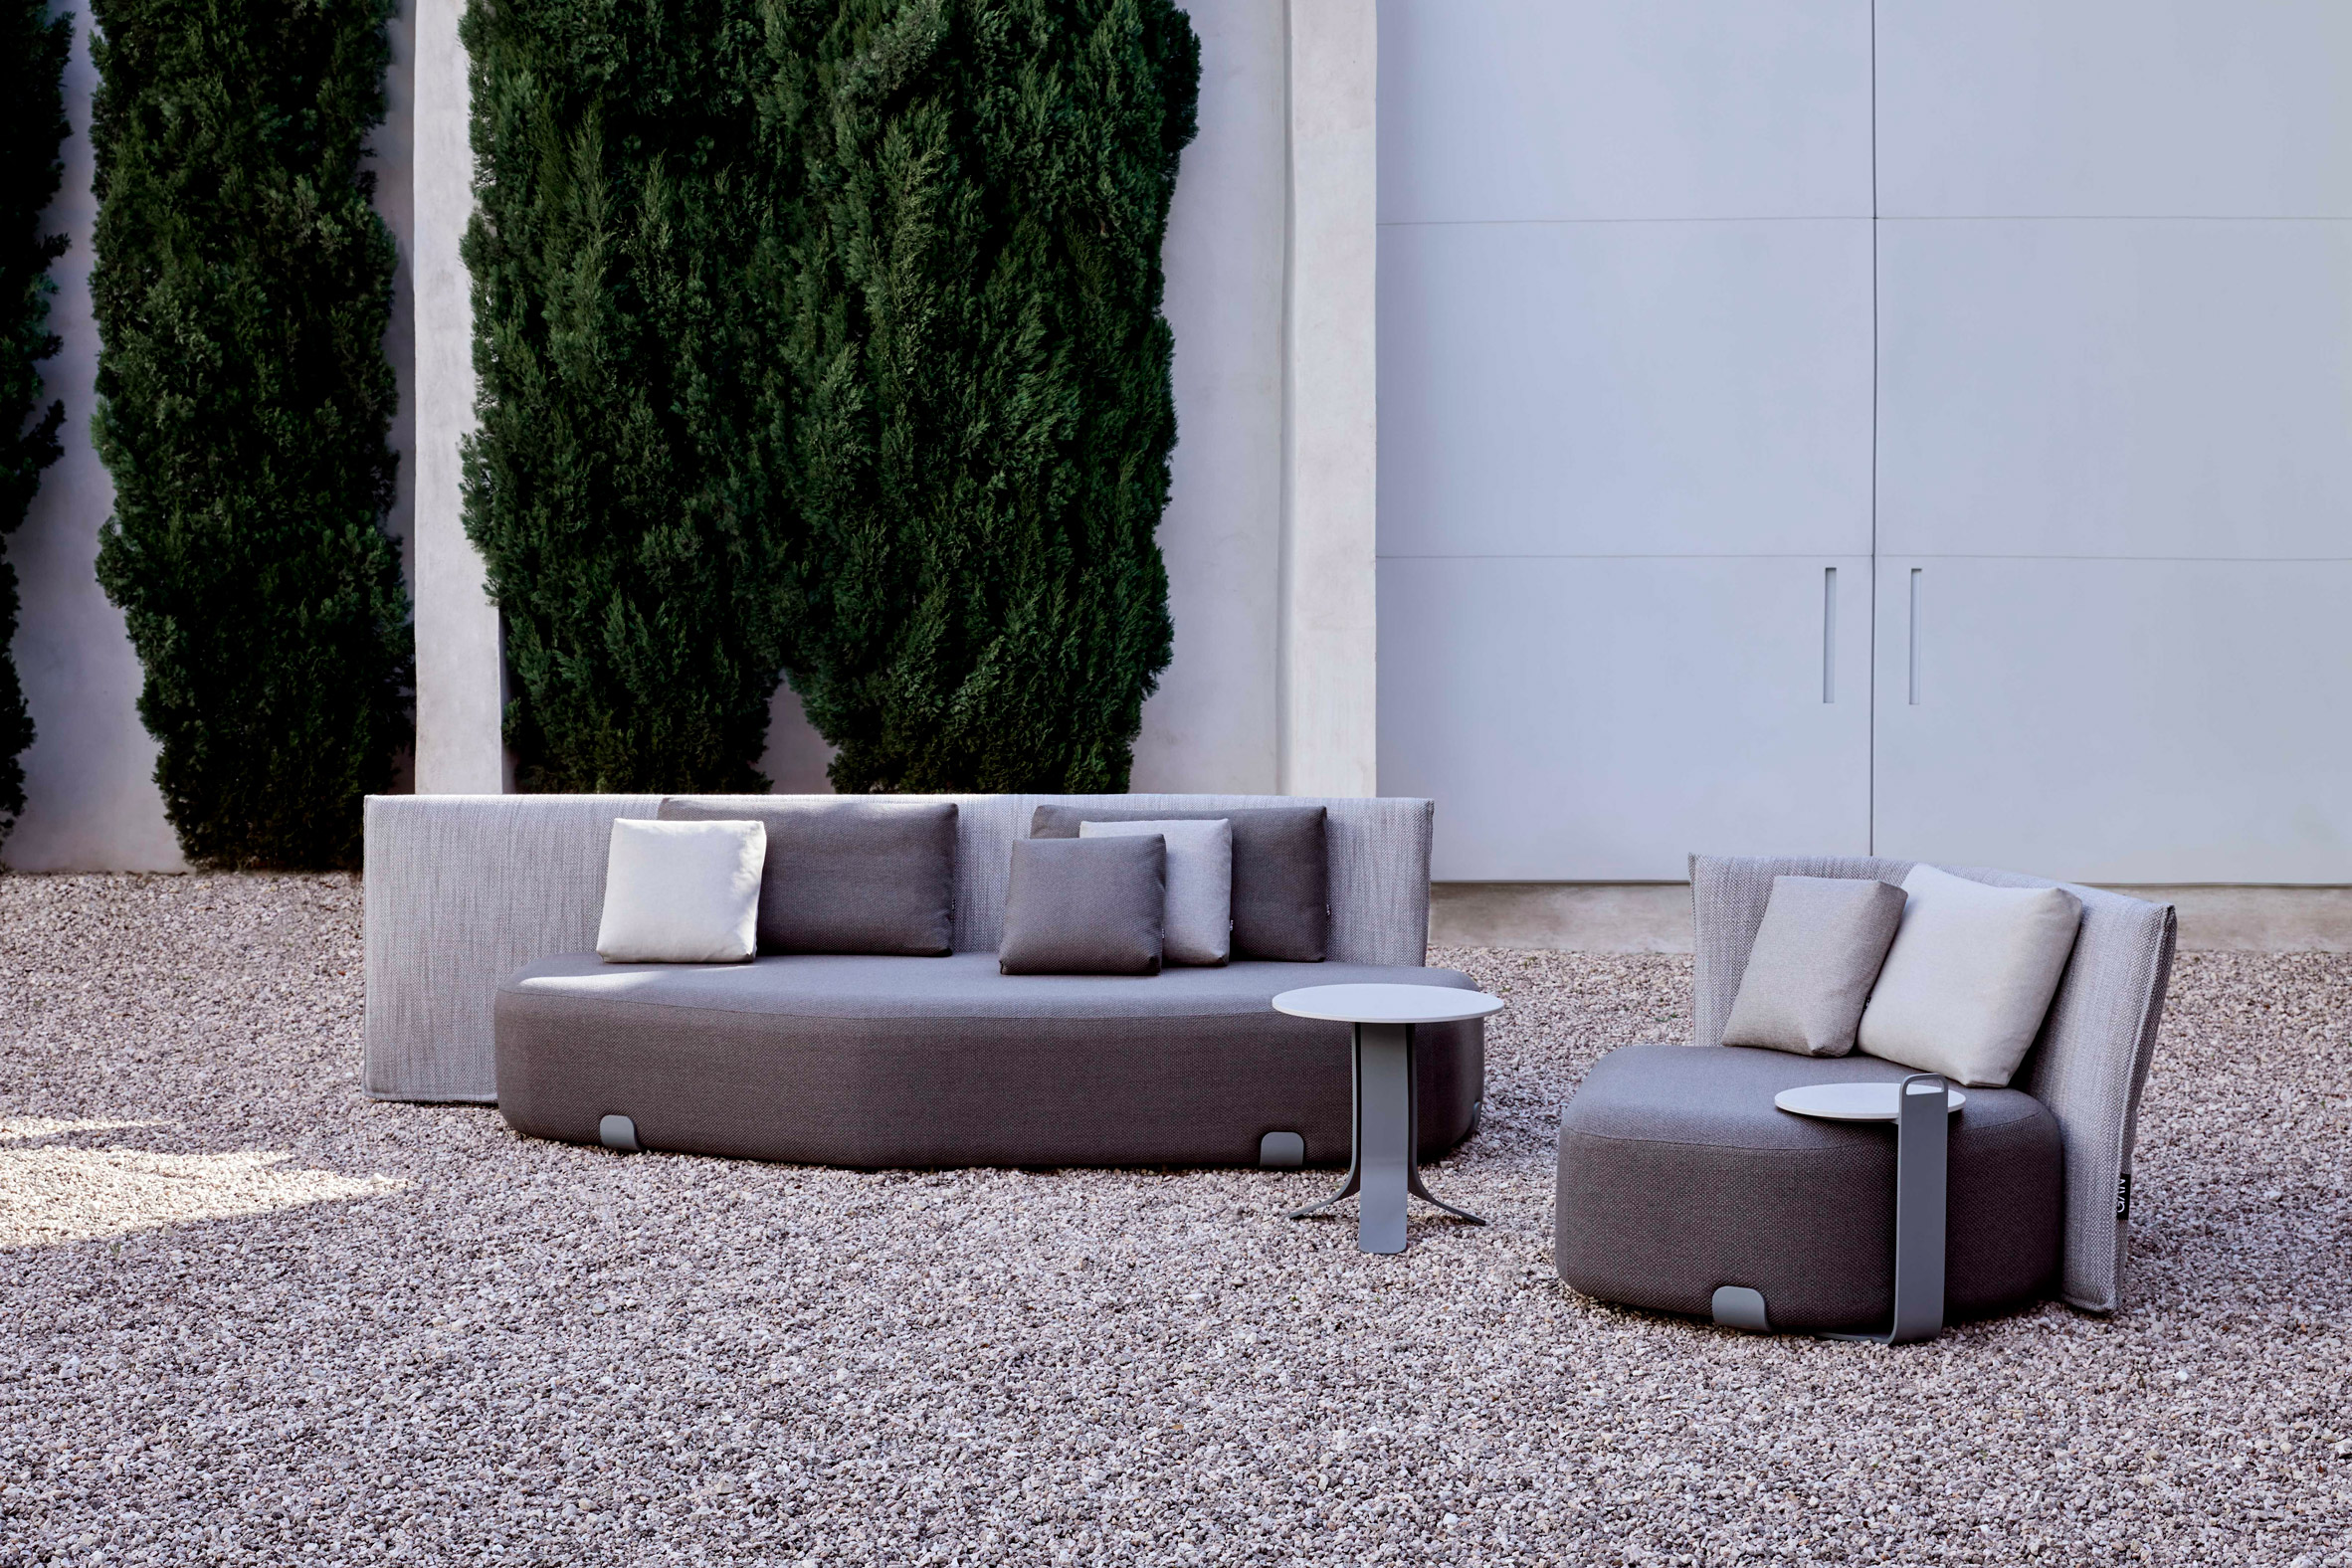 There is a grey upholstered outdoor seating by Gan